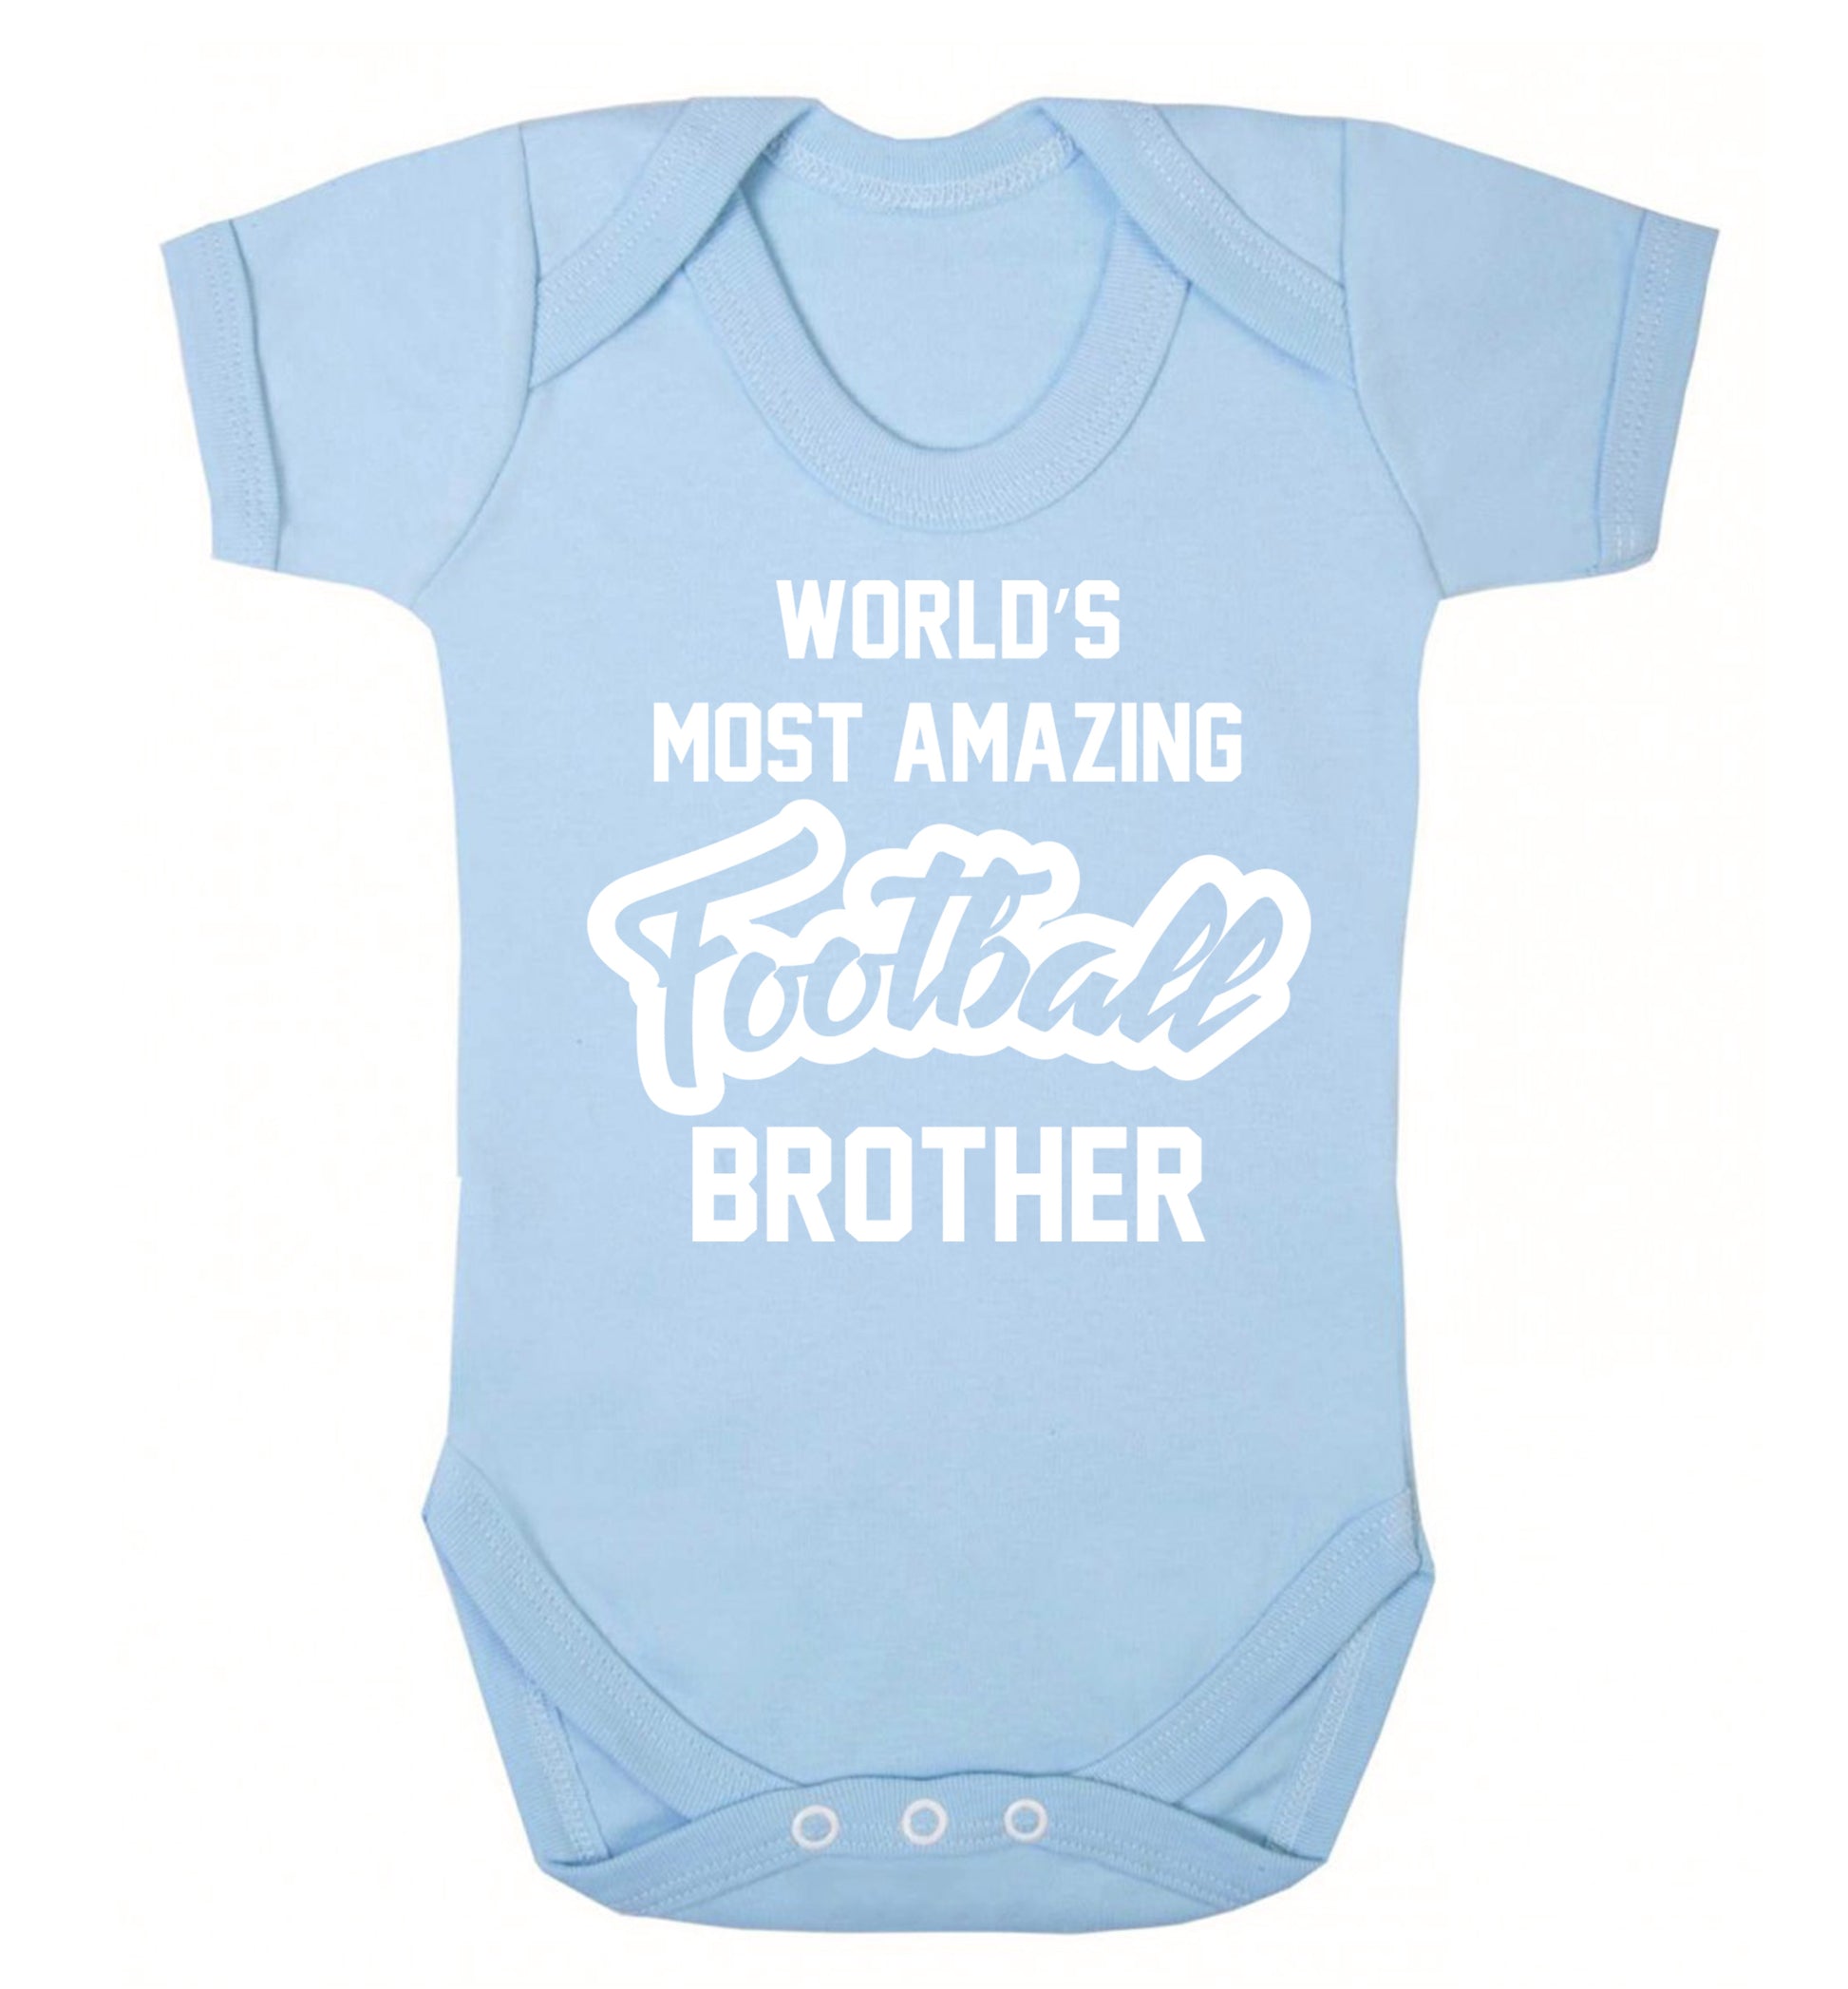 Worlds most amazing football brother Baby Vest pale blue 18-24 months